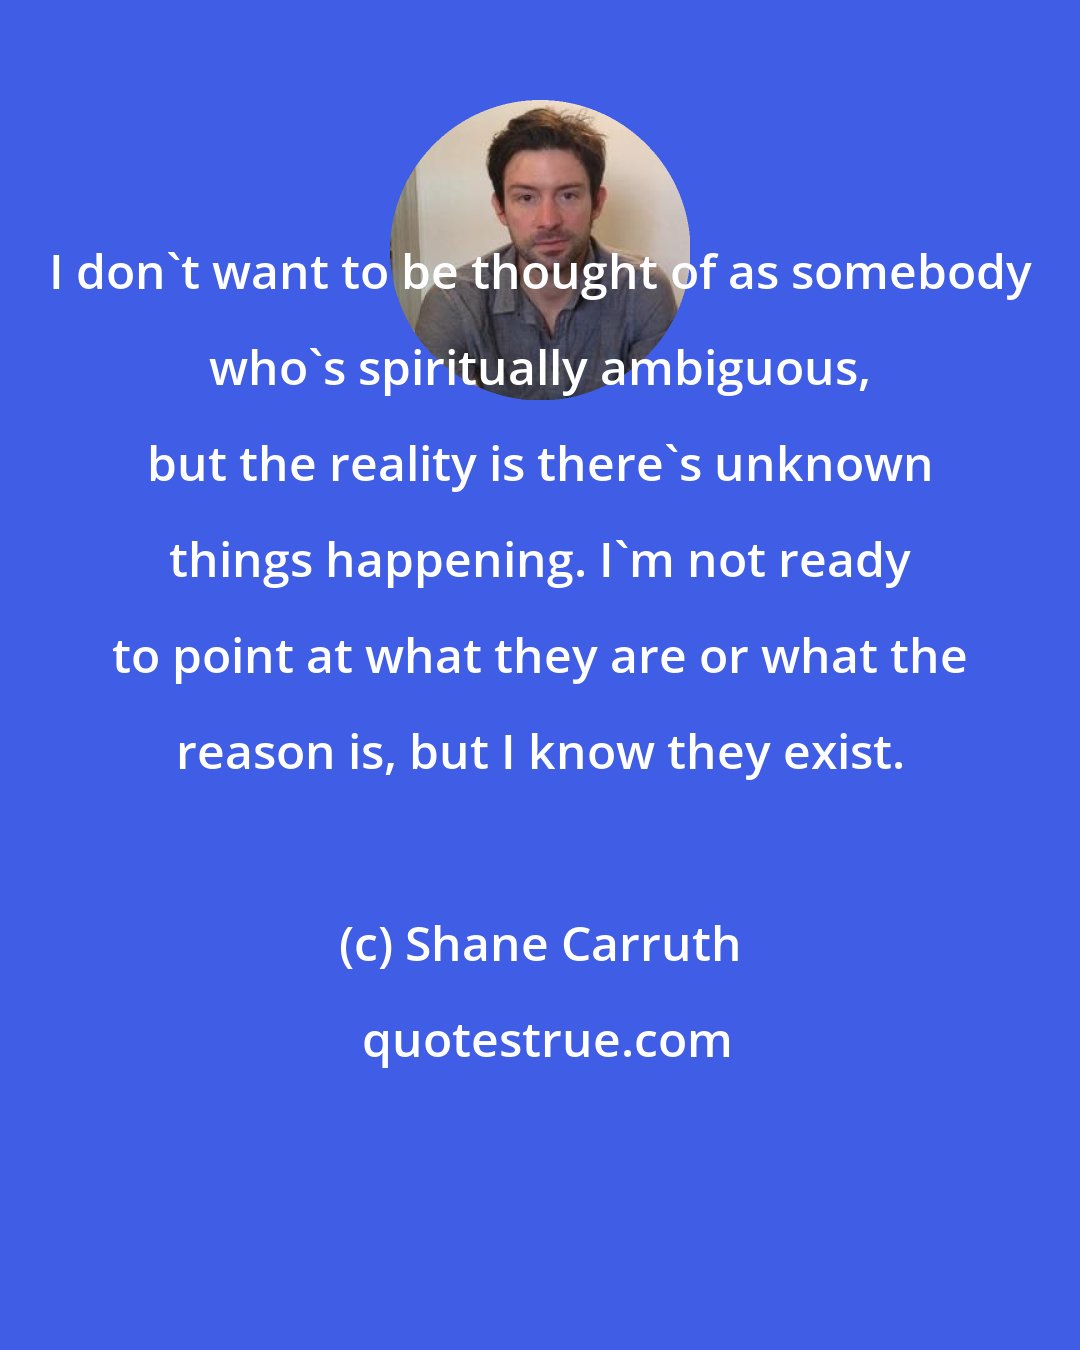 Shane Carruth: I don't want to be thought of as somebody who's spiritually ambiguous, but the reality is there's unknown things happening. I'm not ready to point at what they are or what the reason is, but I know they exist.